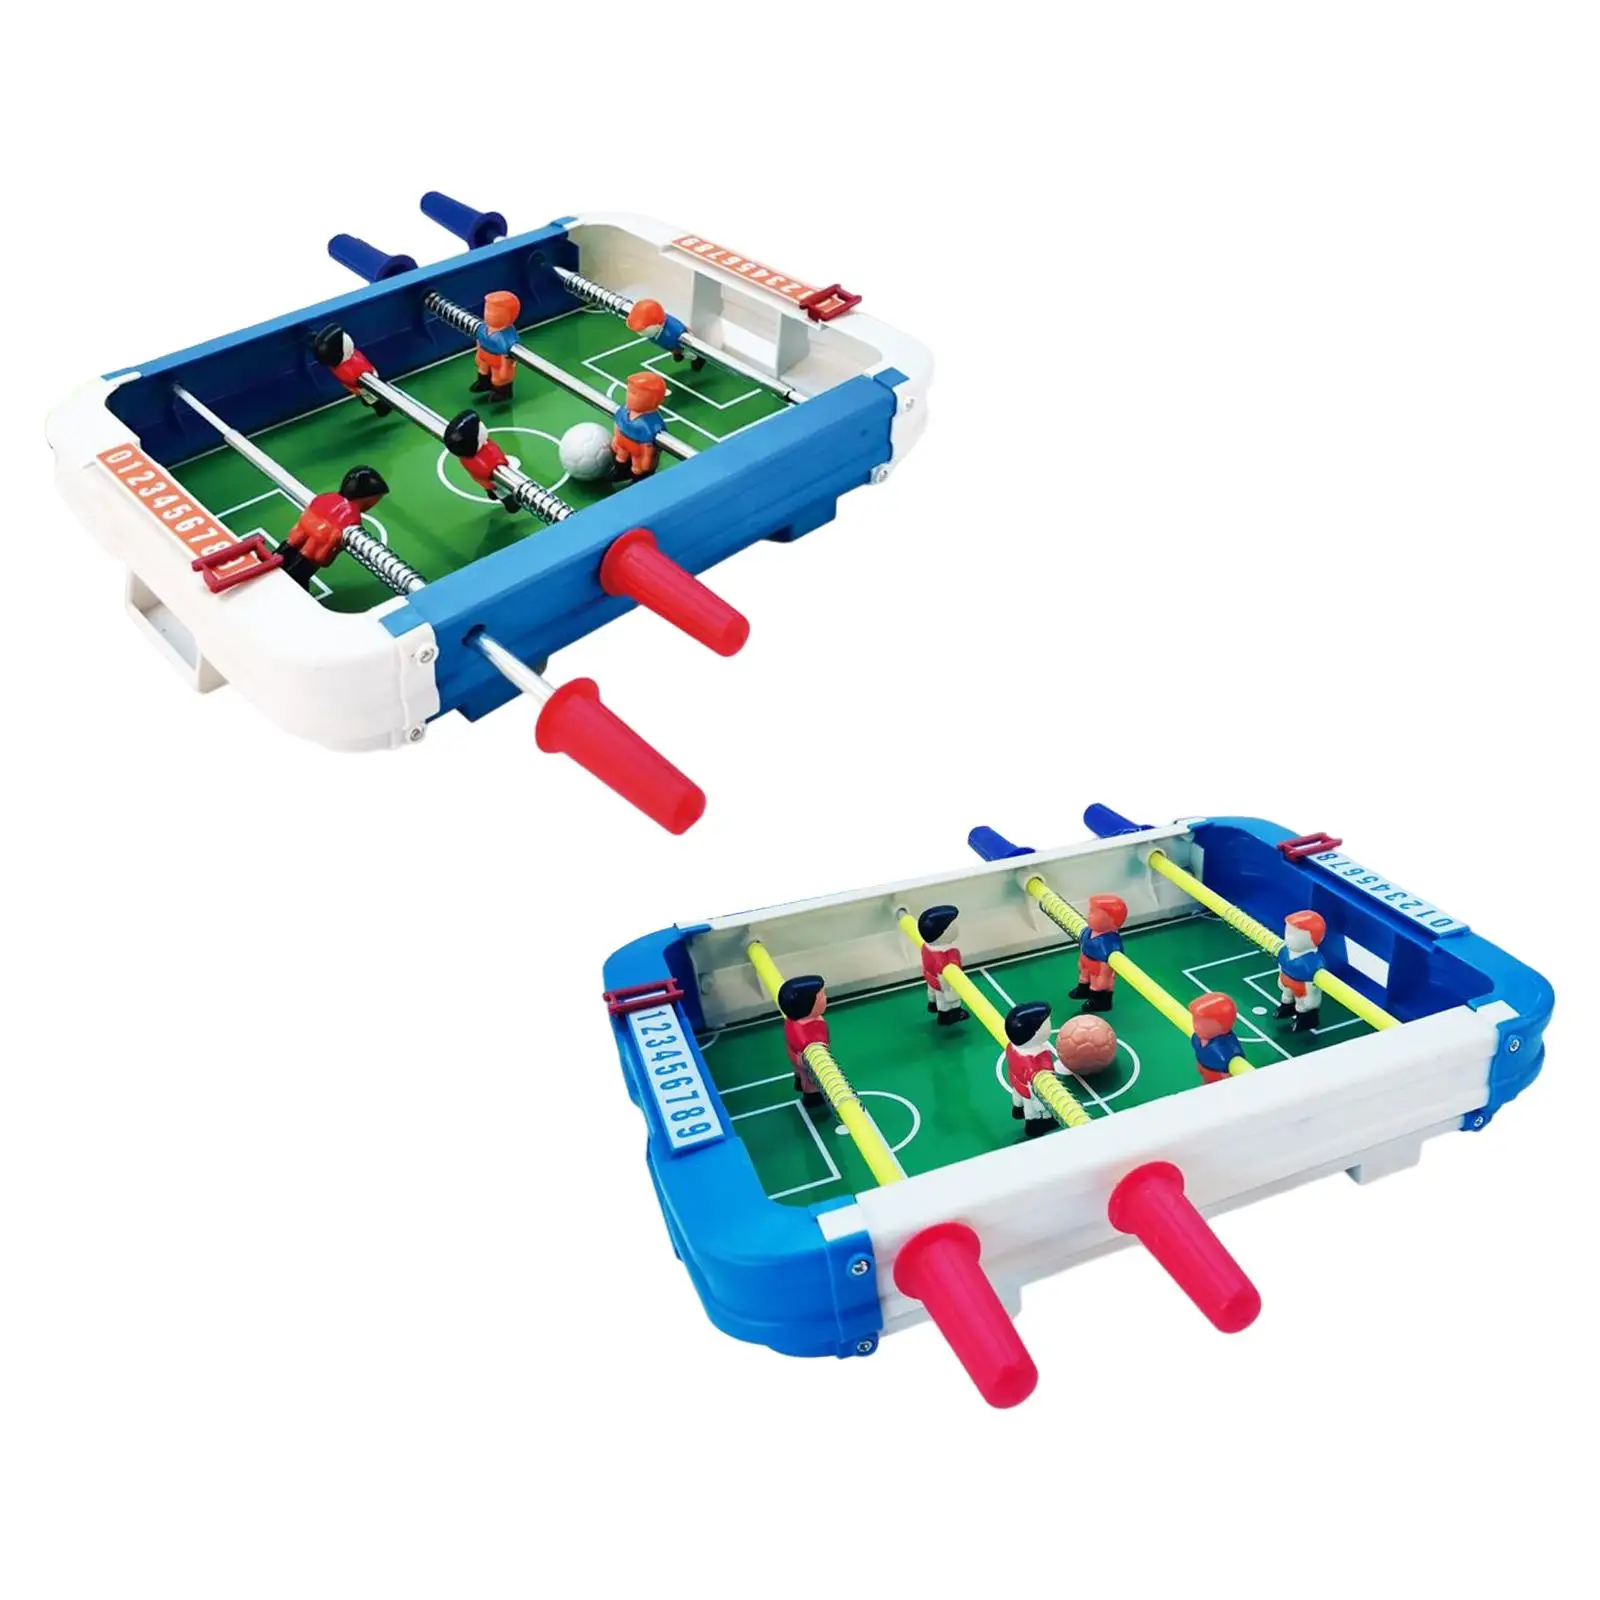 Mini Foosball Table, Tabletop Football Game Early Educational Toy Competitive Soccer Entertainment Party Game for Birthday Gifts